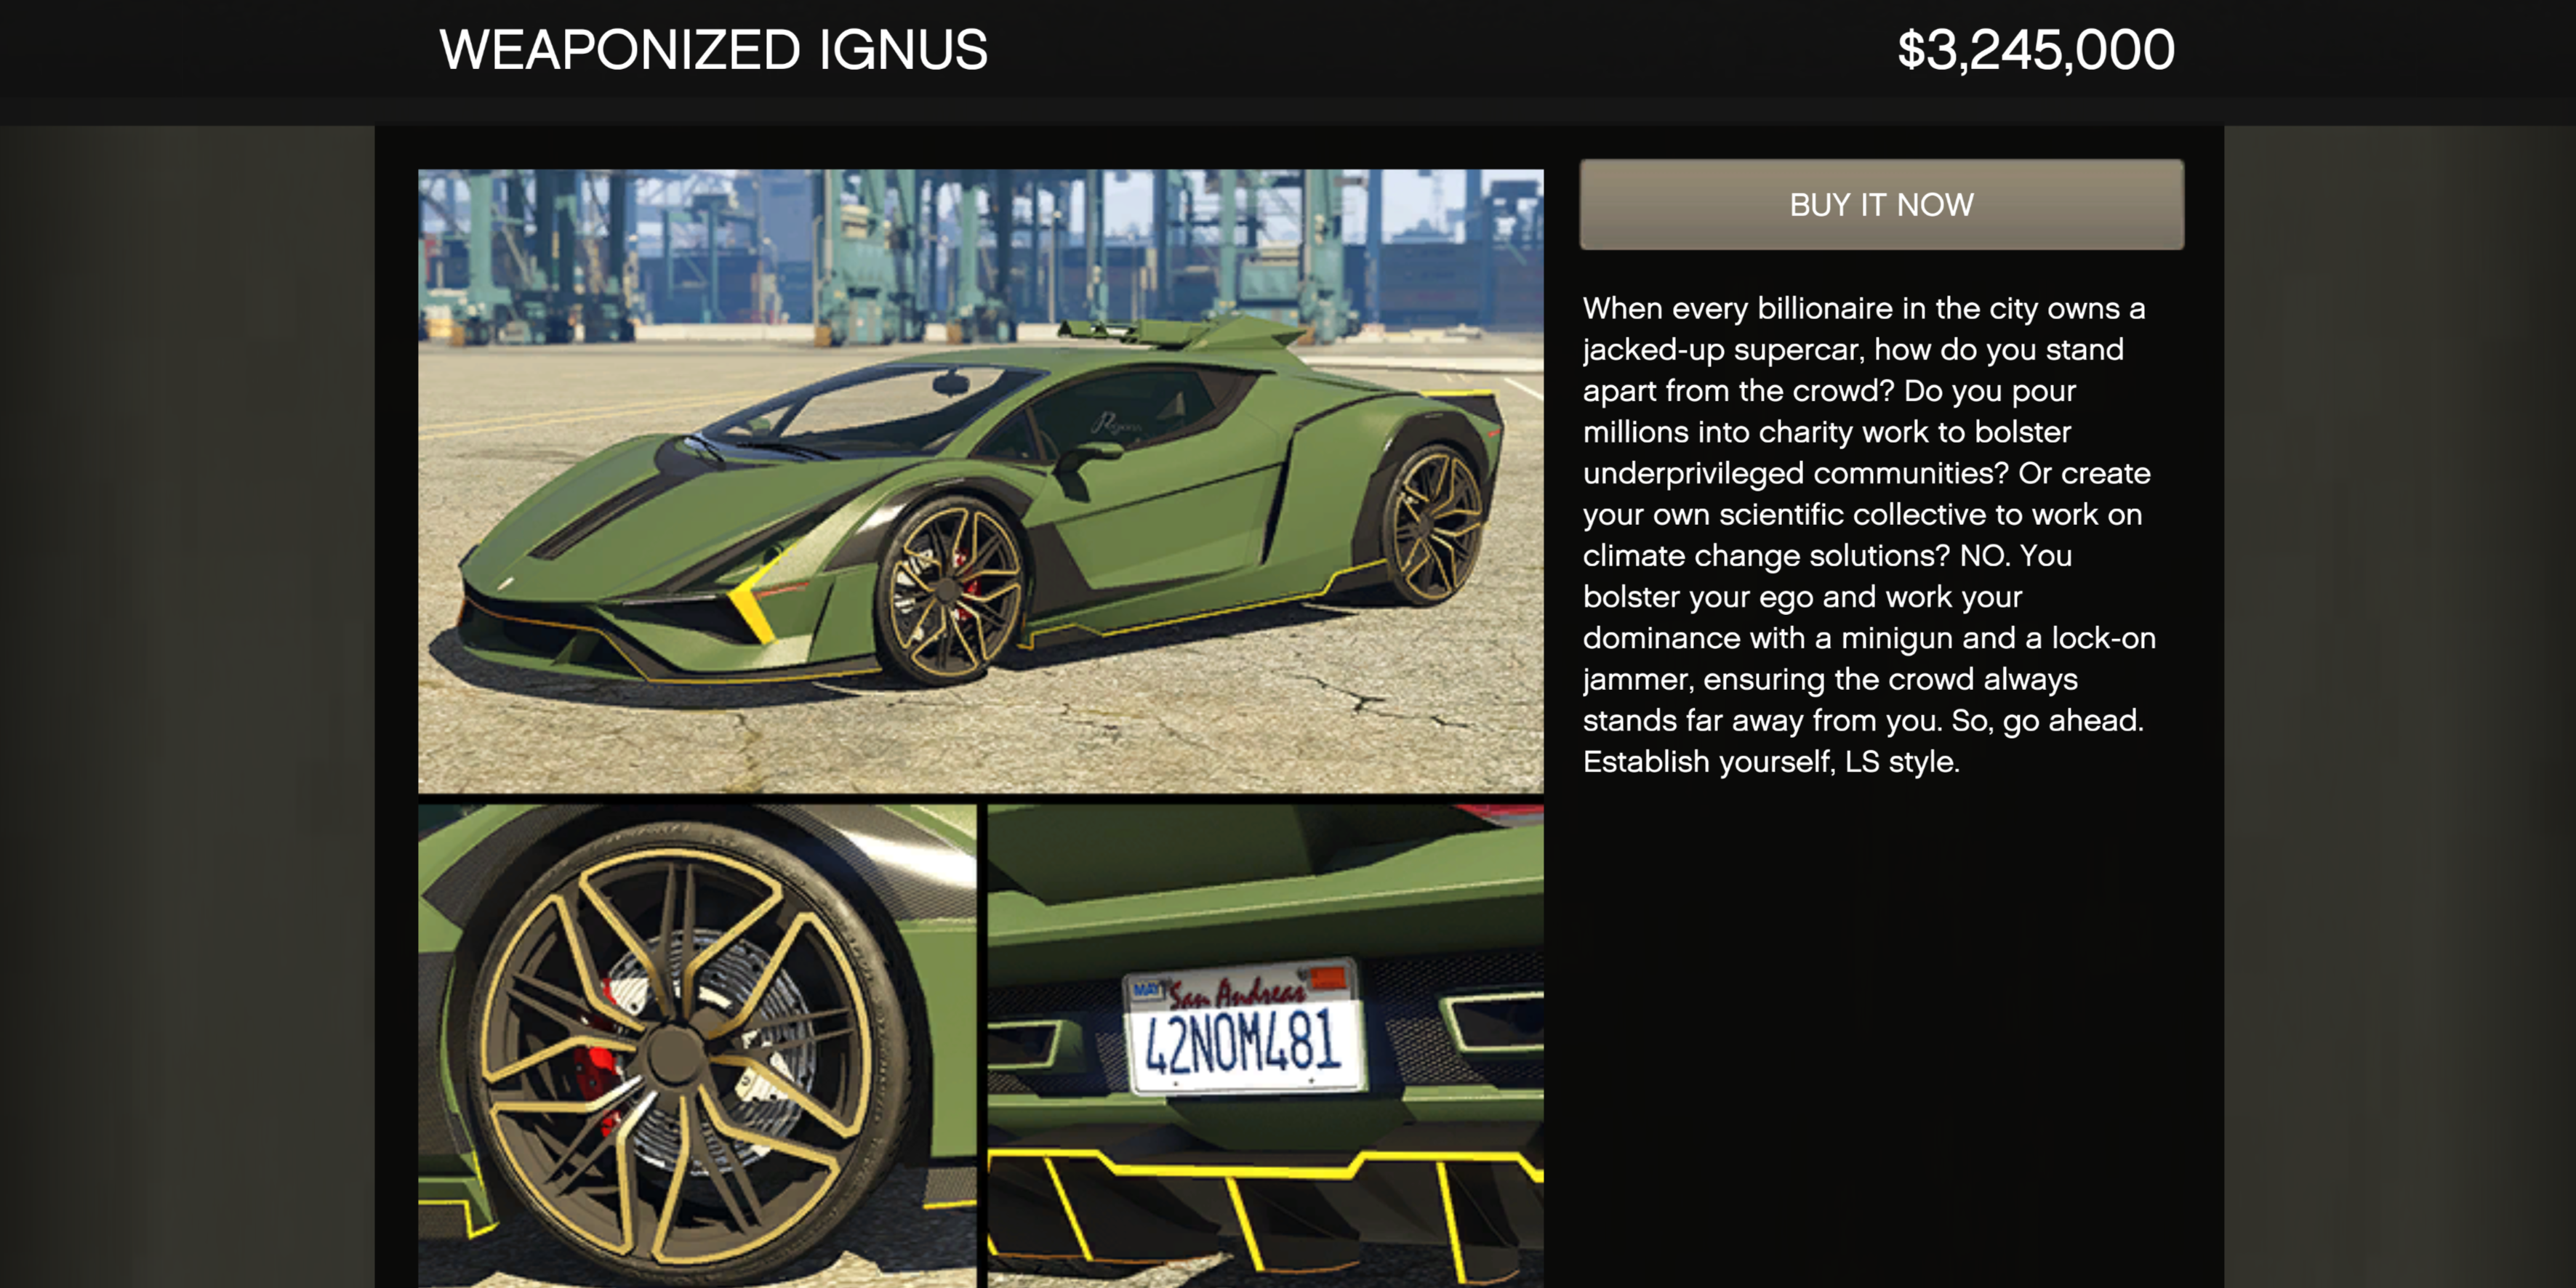 A green Pegassi Weaponized Ignus for Sale in GTA Online